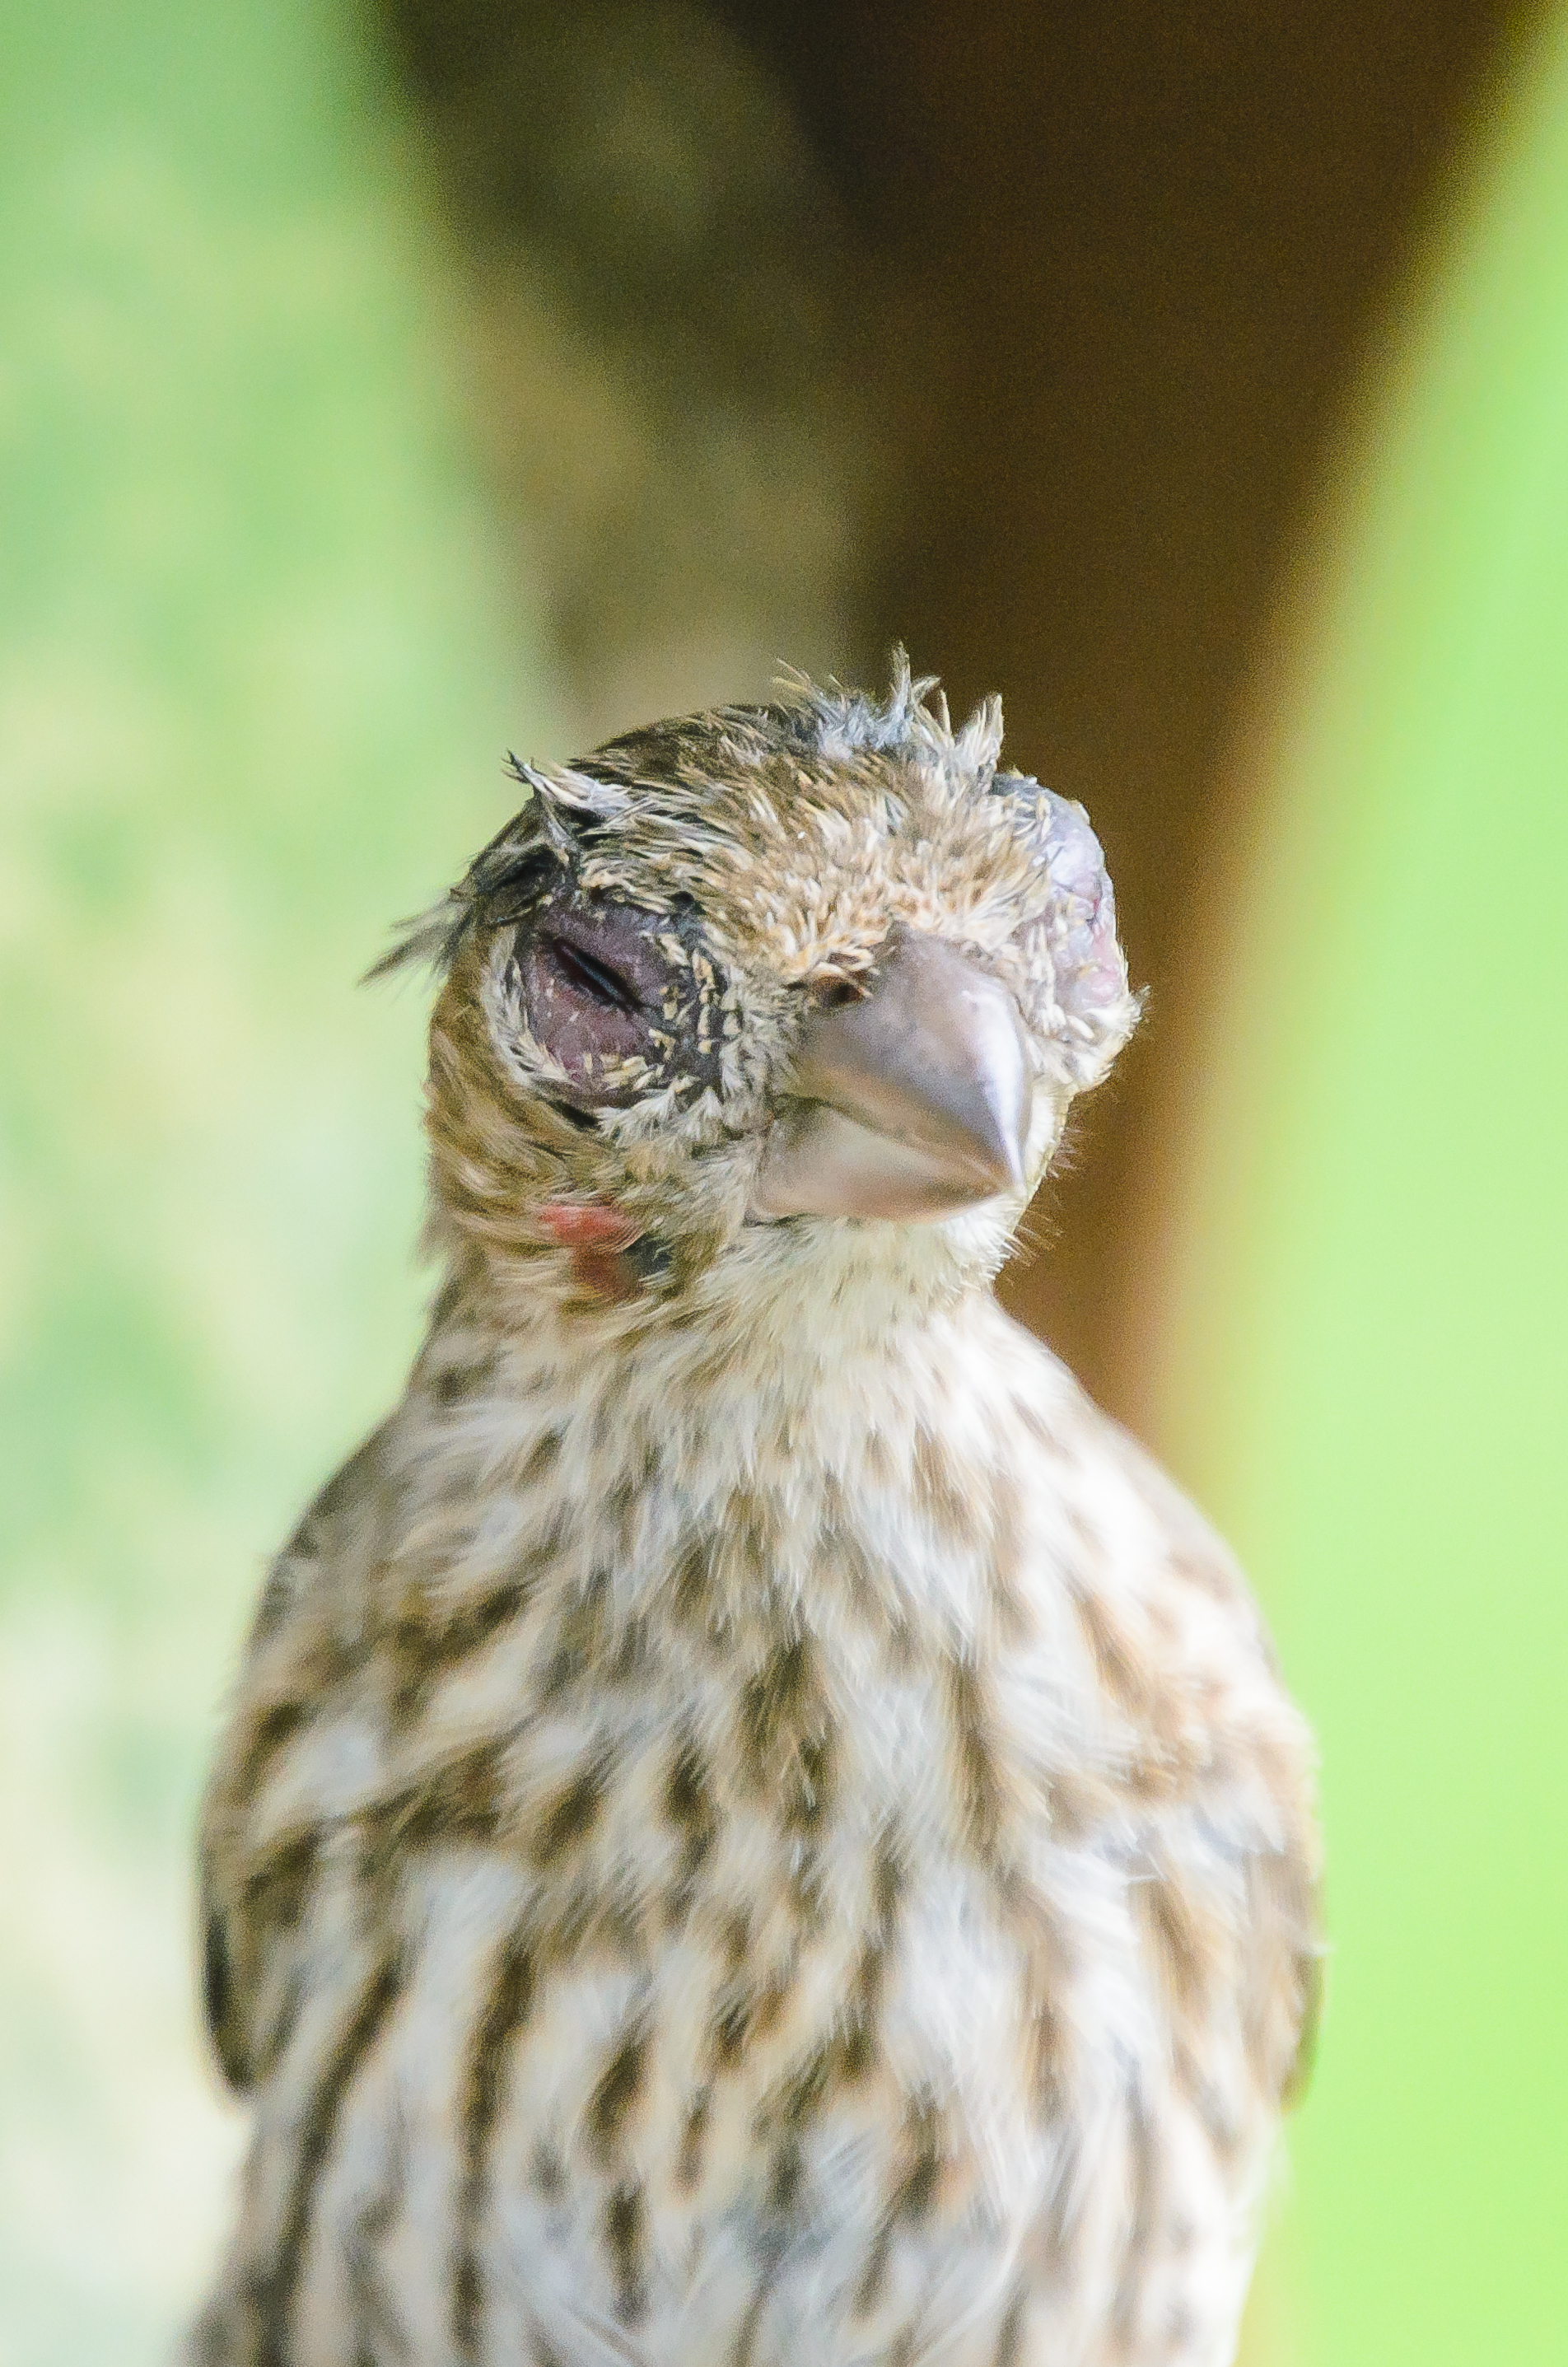 A wild female house finch exhibiting signs of Mycoplasmal conjunctivitis; eyes are crusty and nearly swollen shut.